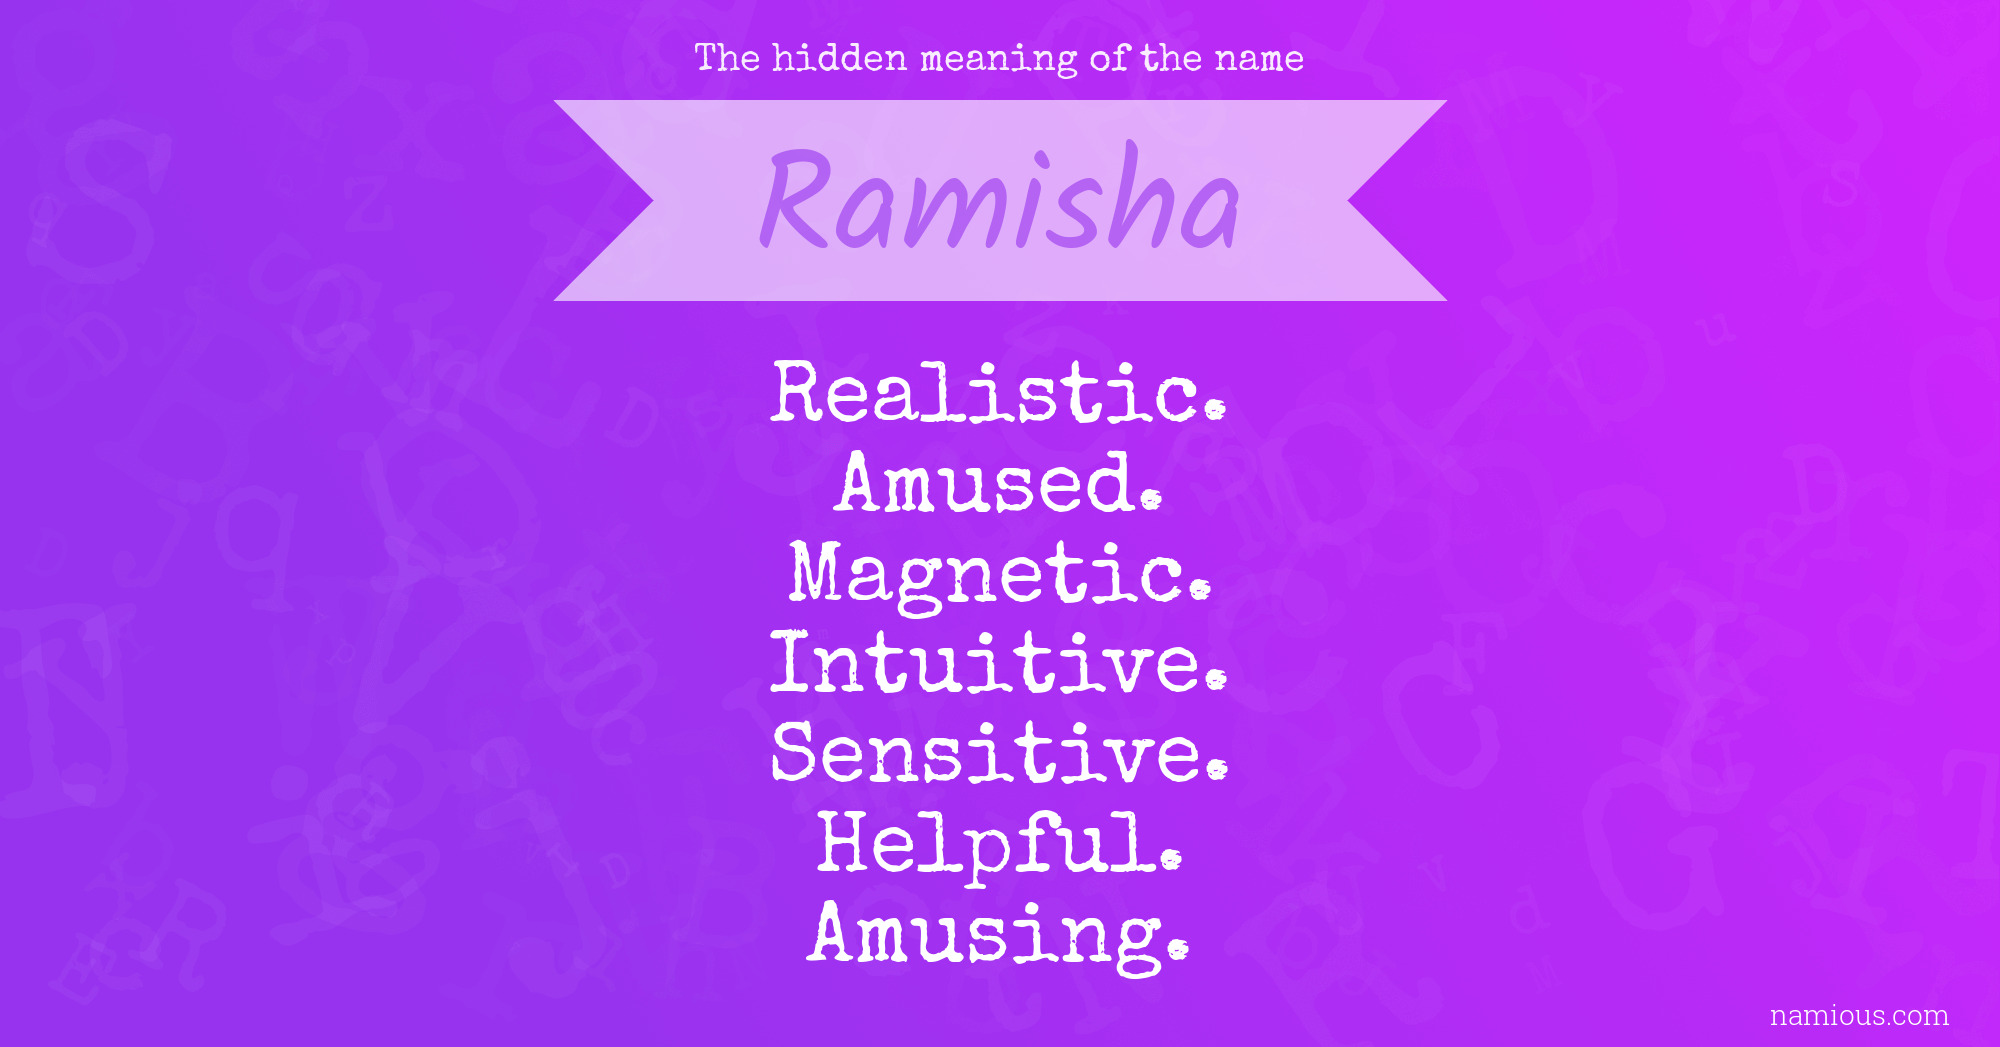 The hidden meaning of the name Ramisha